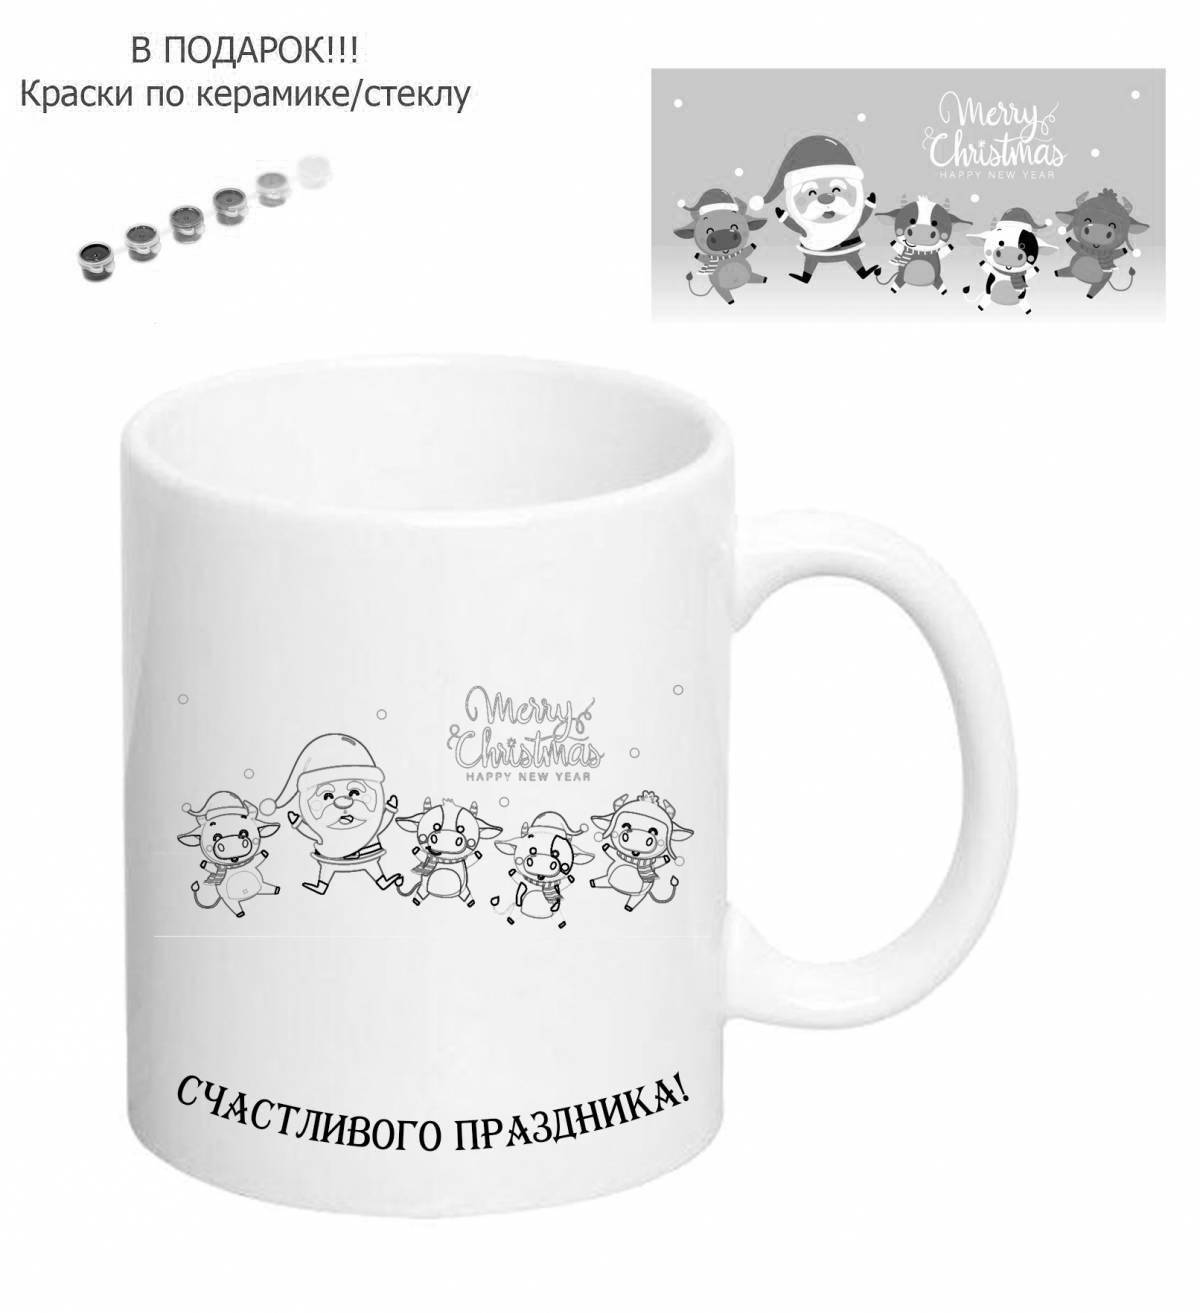 Fun instructions for coloring mugs